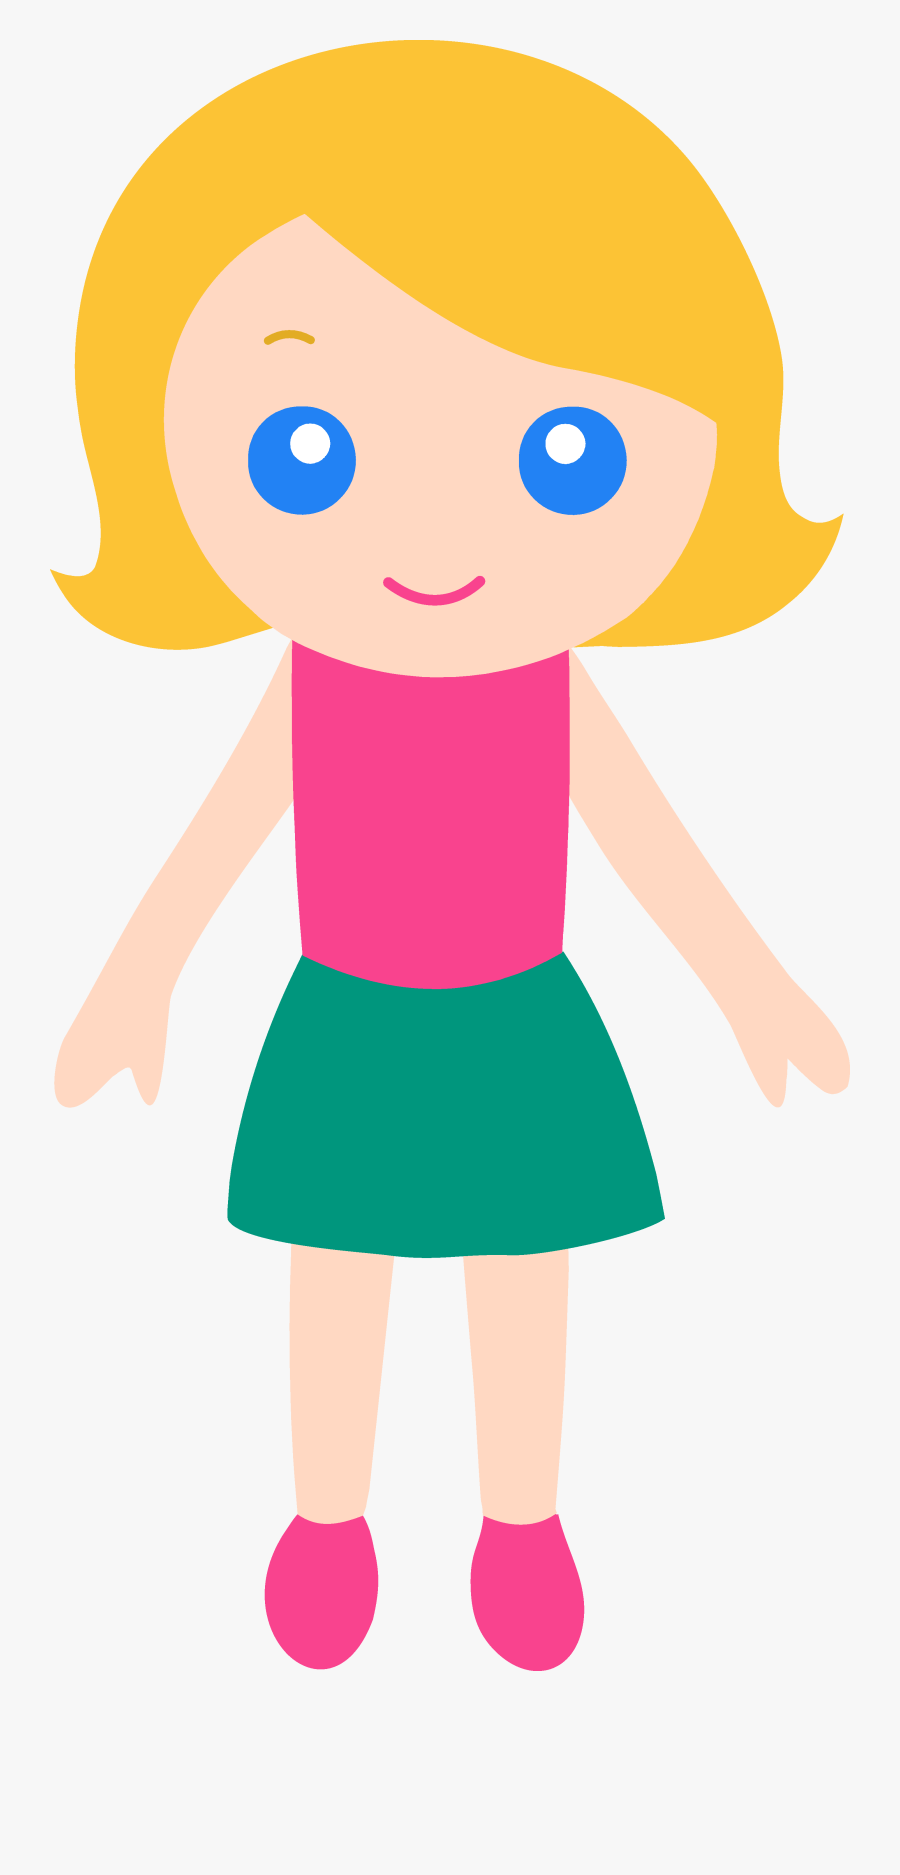 Clipart Of Young Girl - Cartoon Girl With Blonde Hair And Blue Eyes, Transparent Clipart